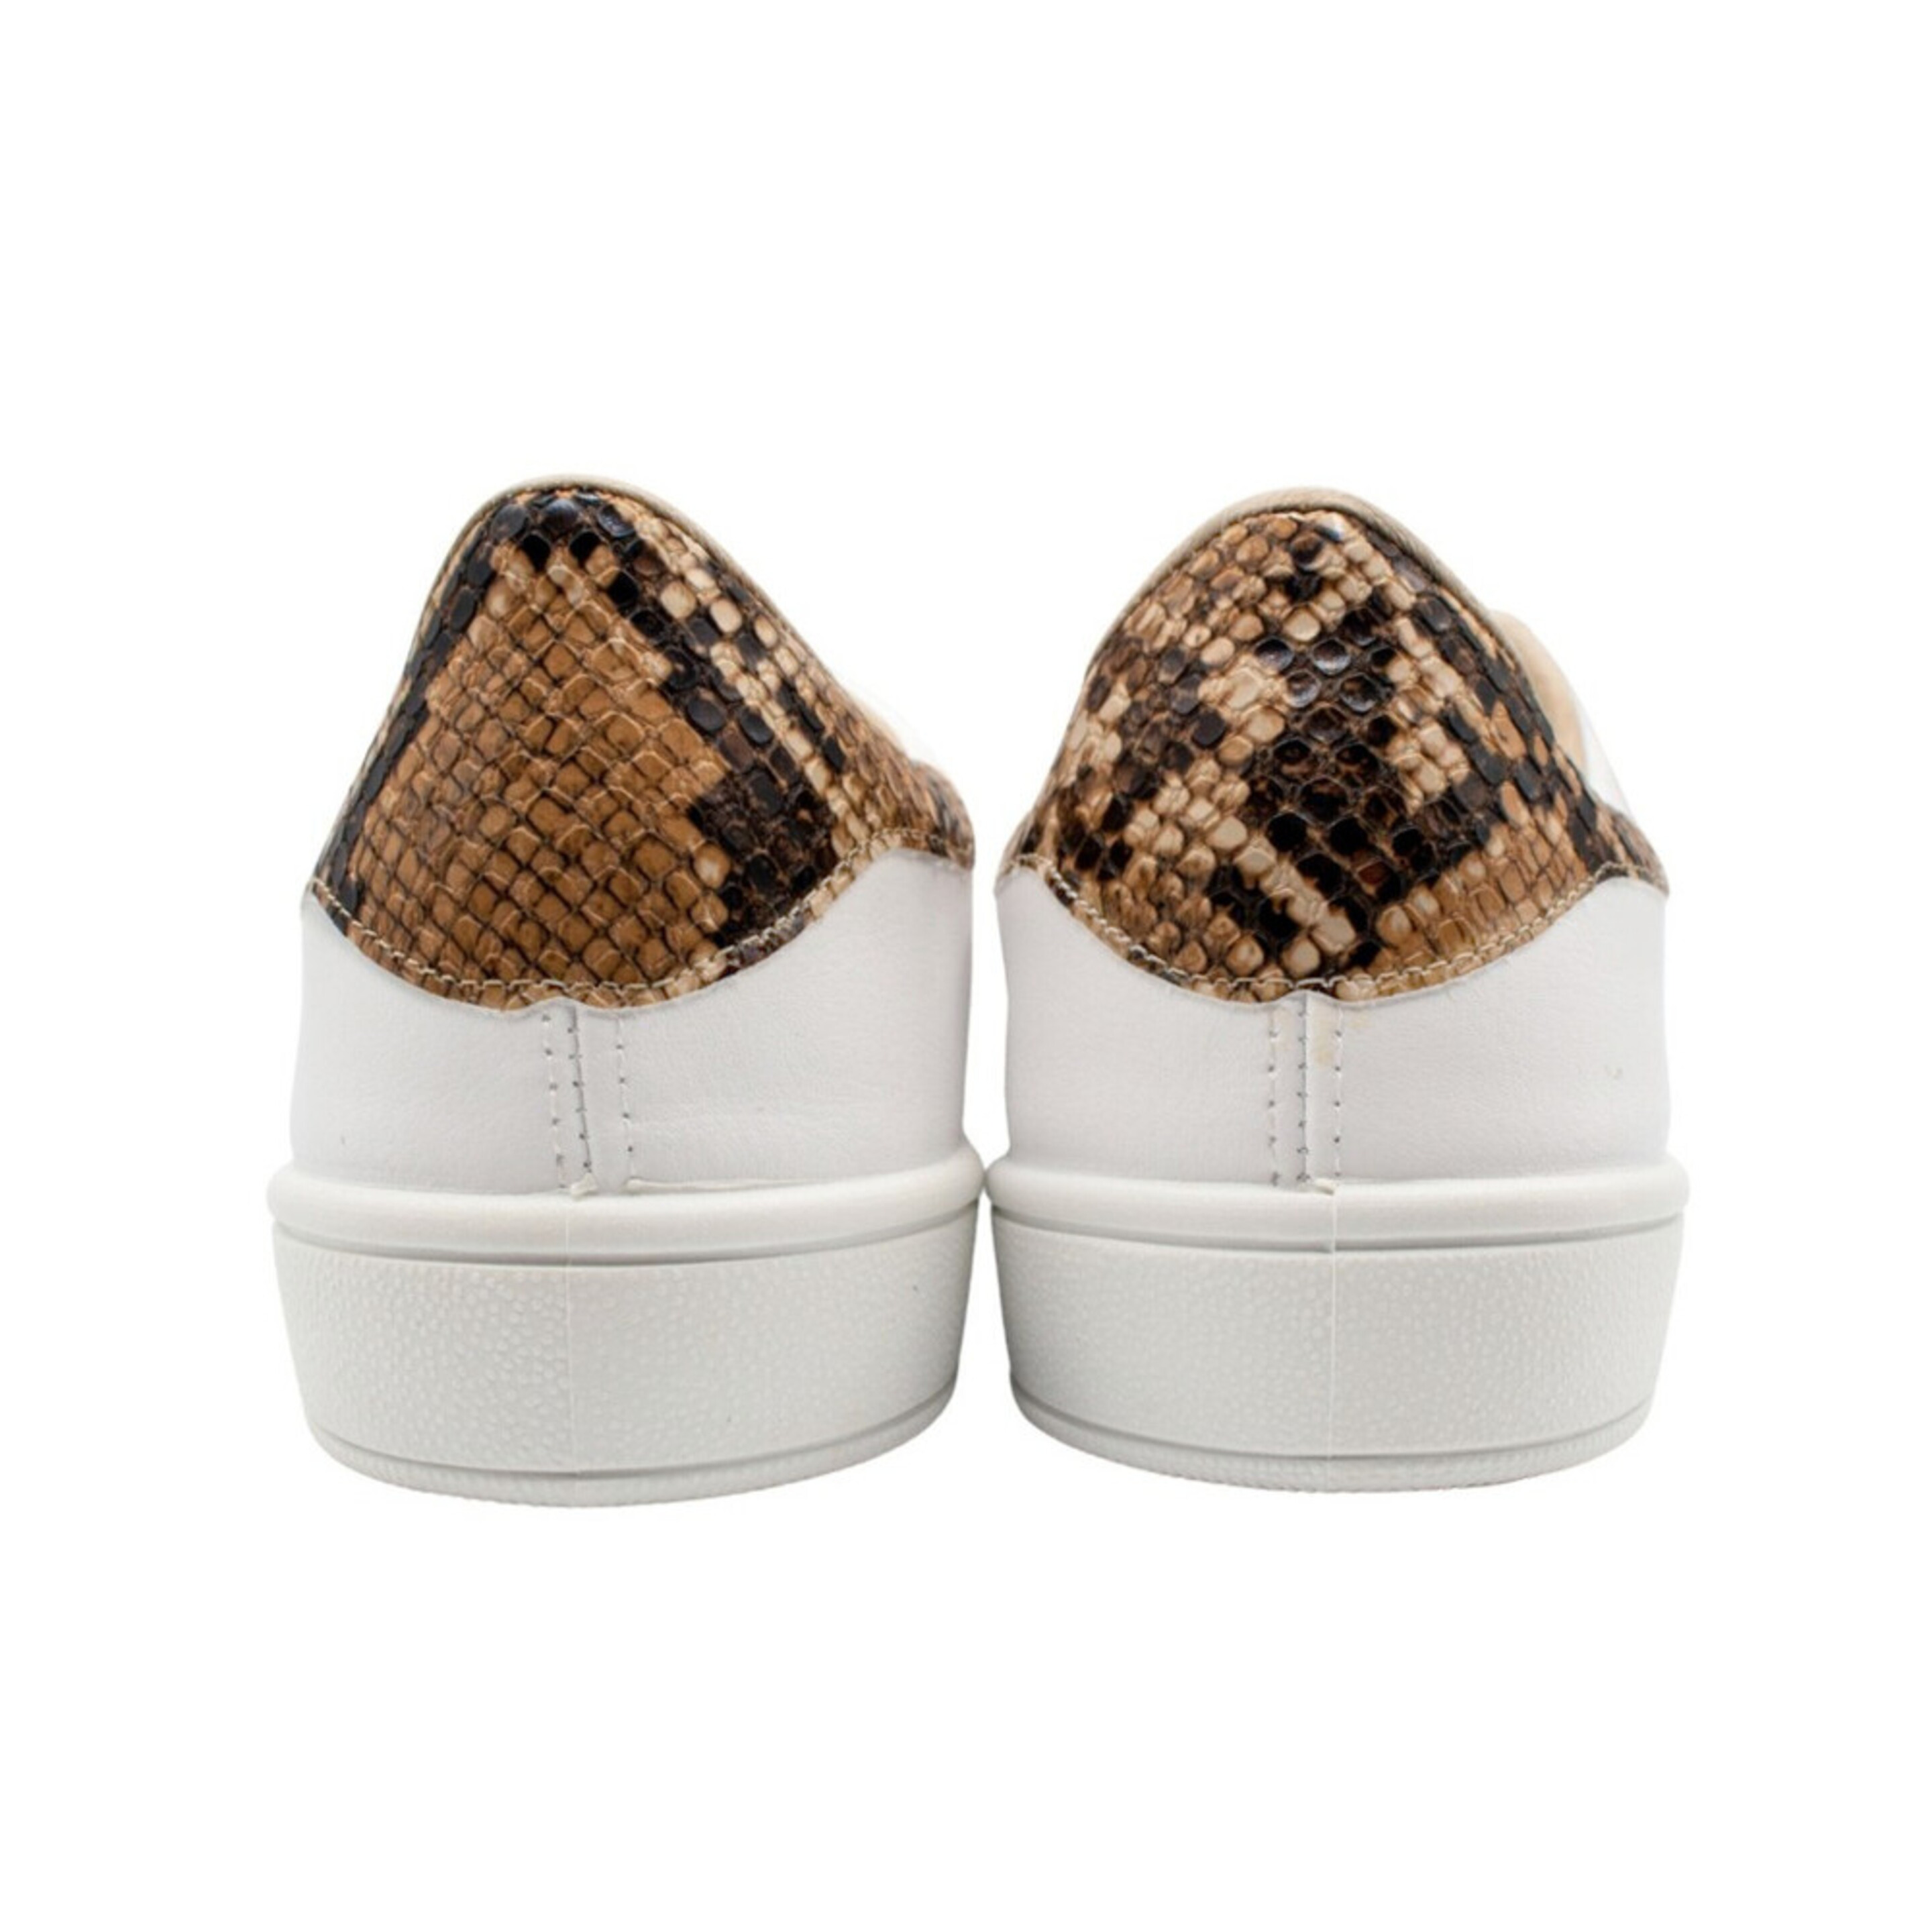 Sneaker Owlet Shoes Python